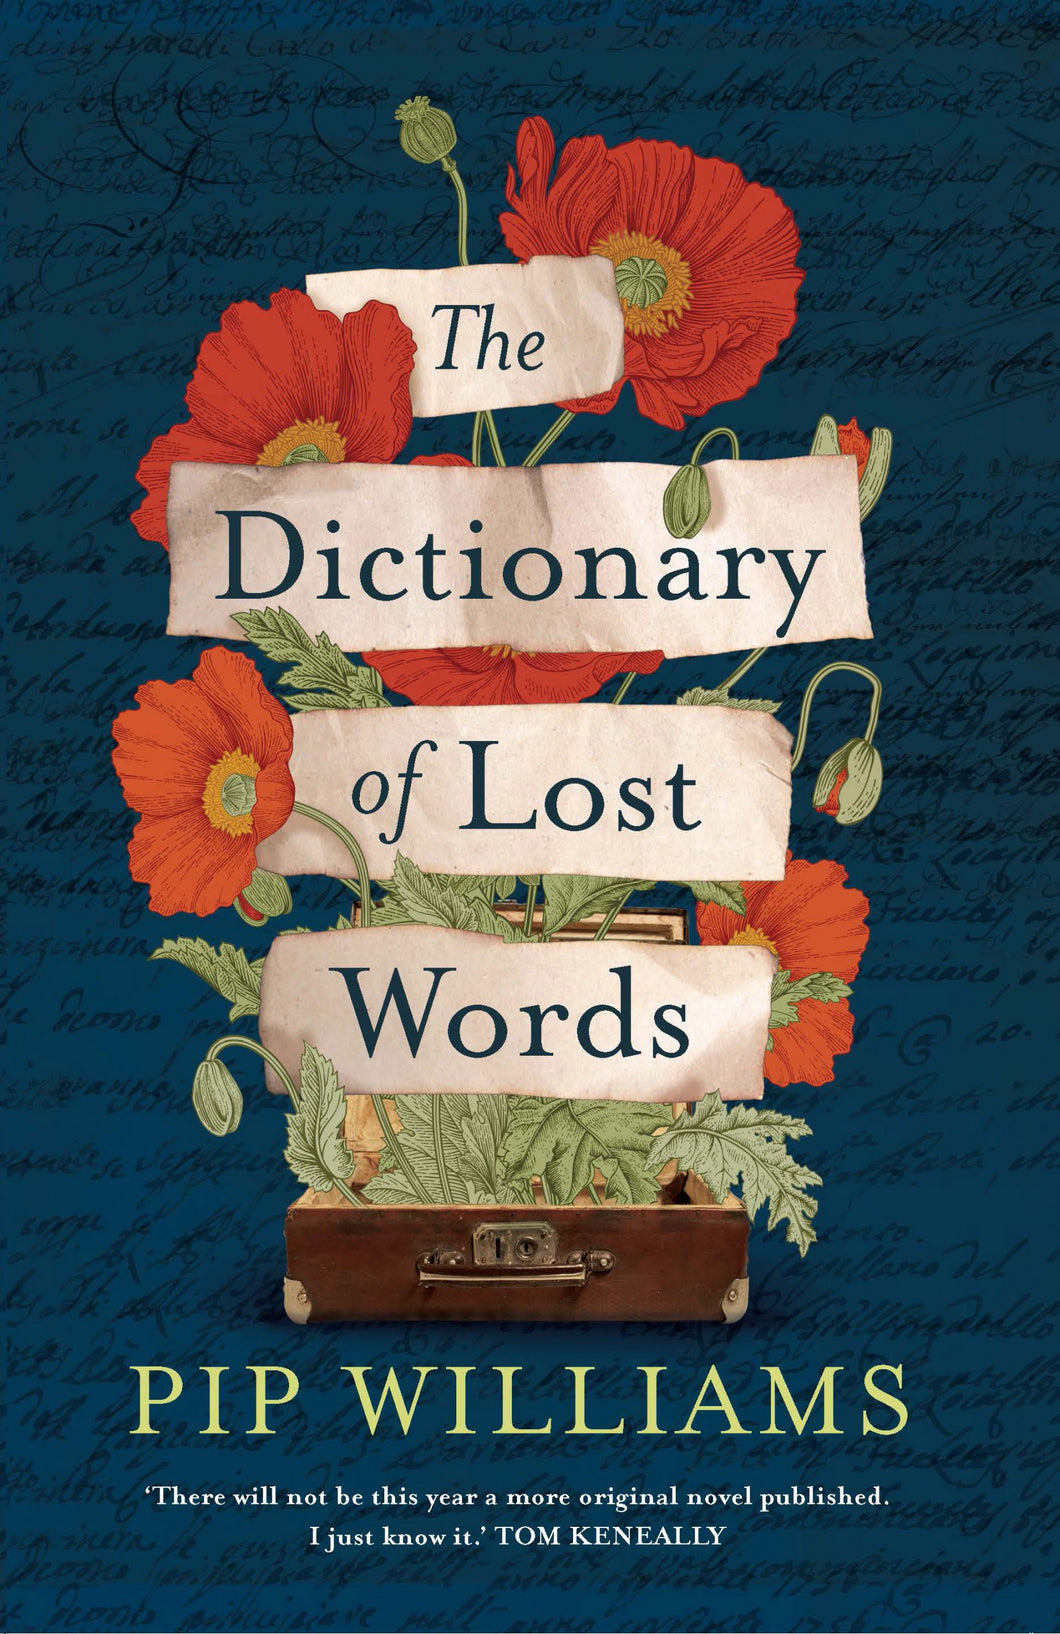 Dictionary of Lost Words by Pip Williams